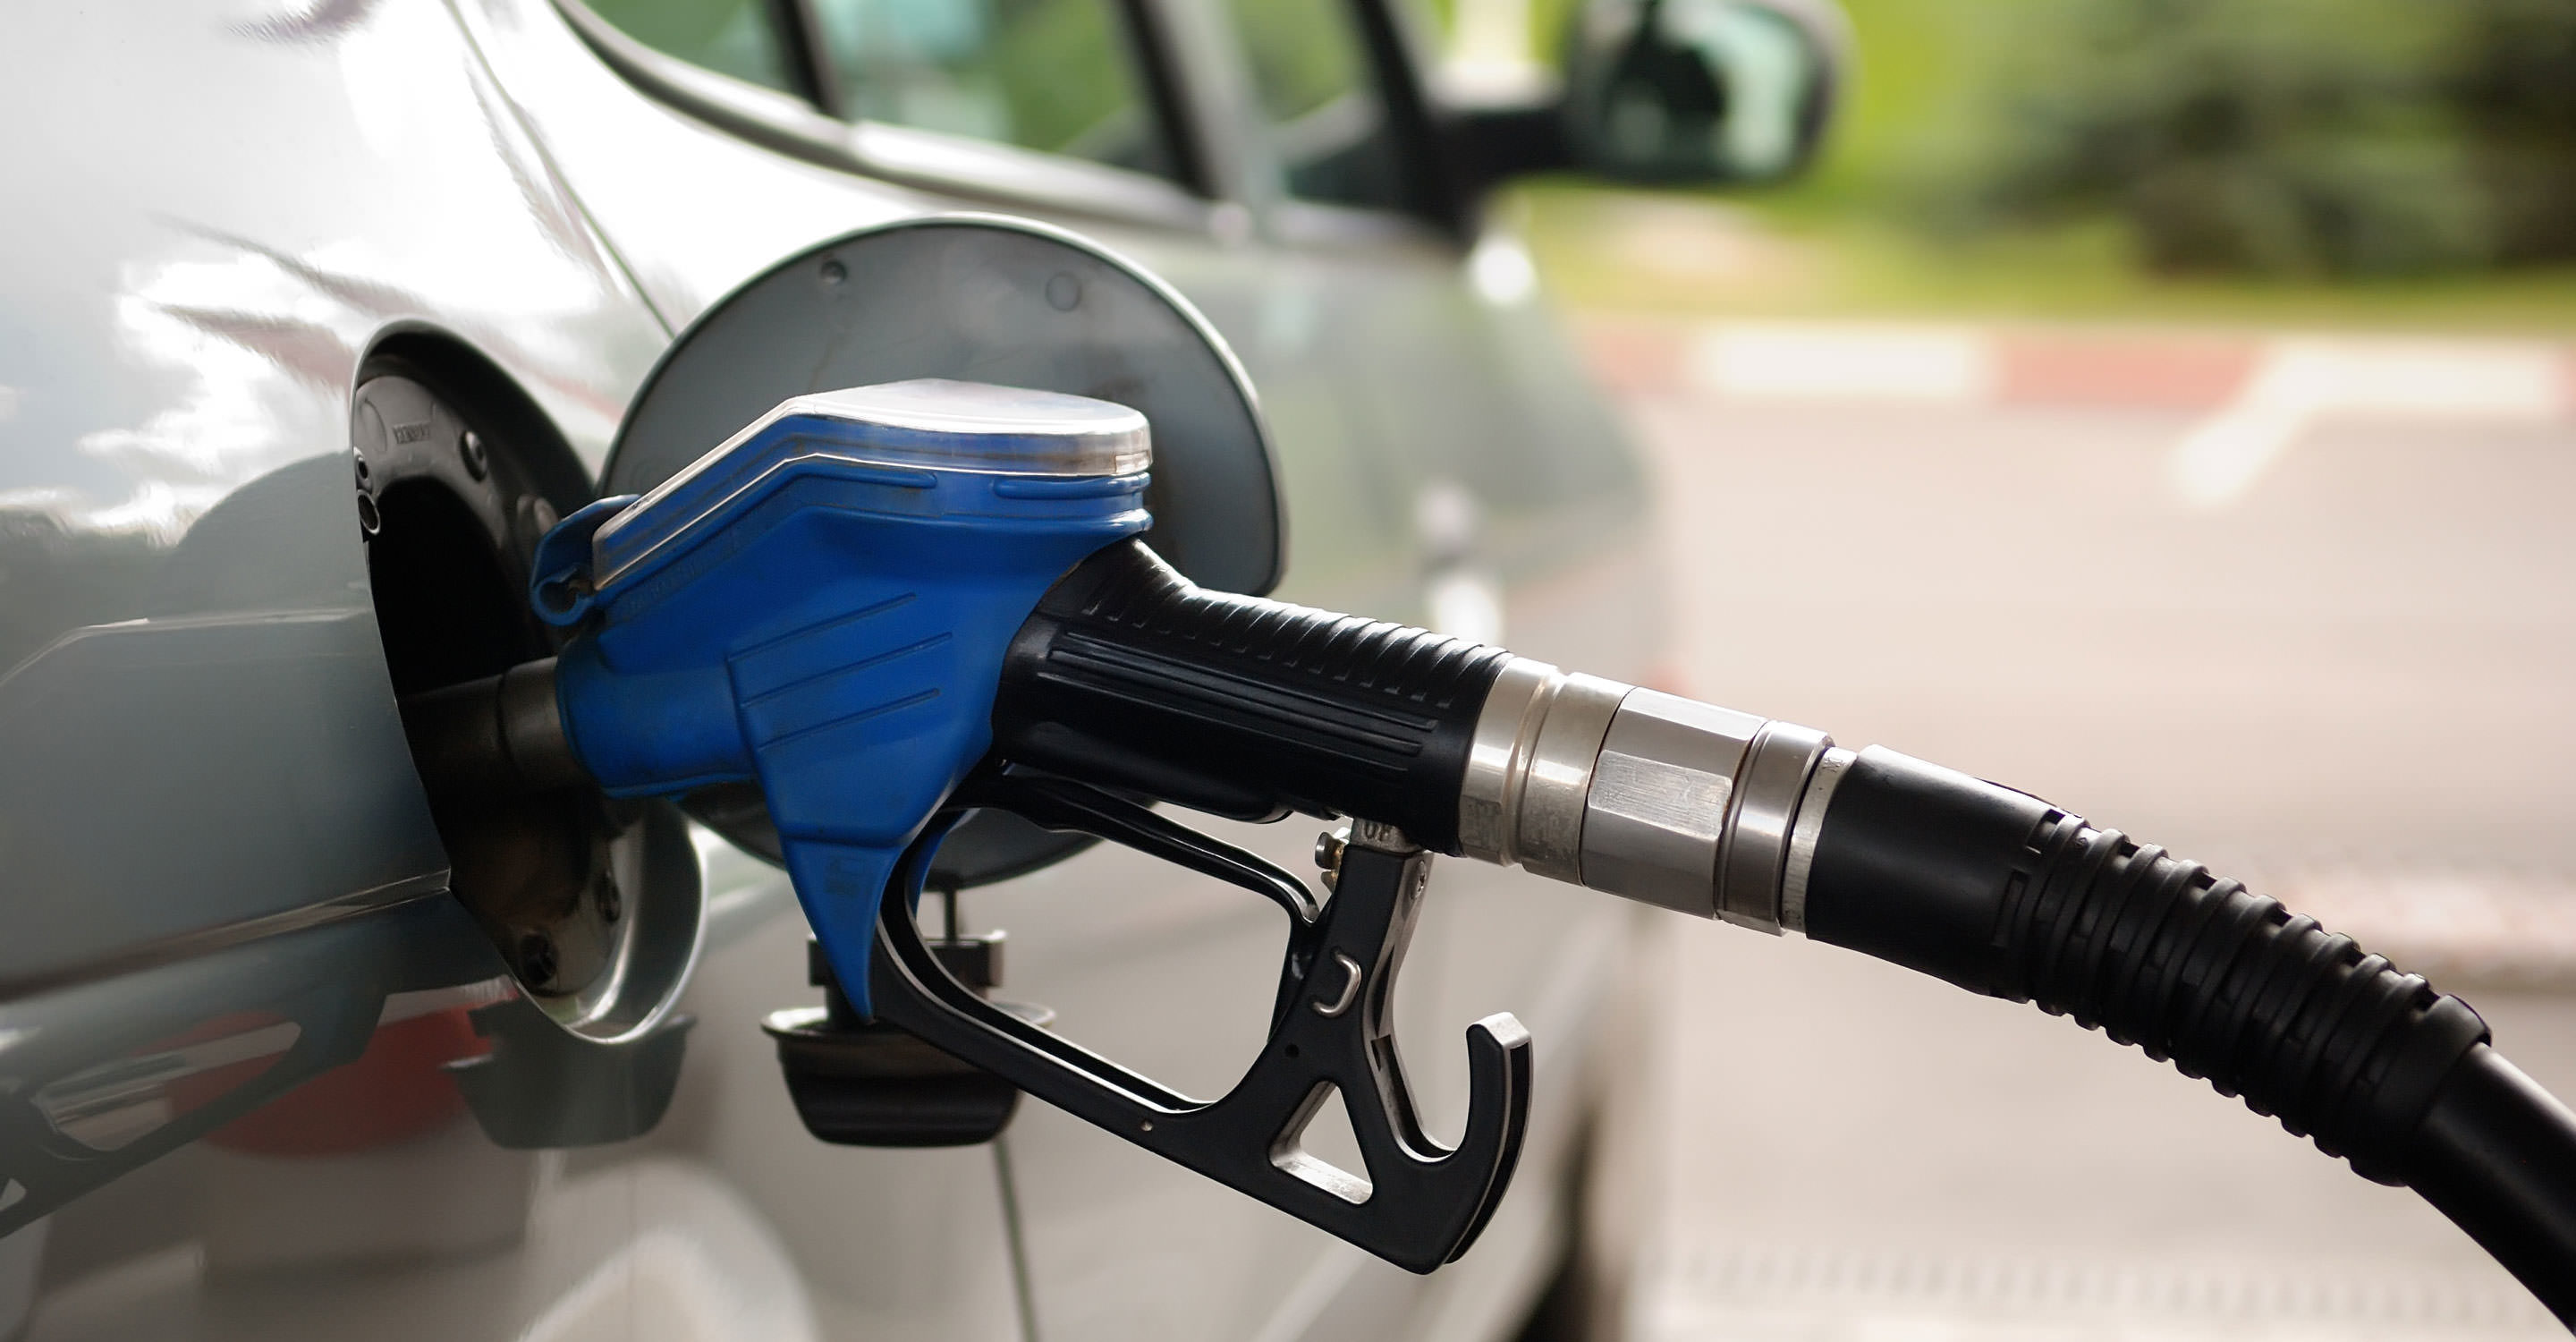 Simple Ways to Improve Your Vehicle's Fuel Economy - How to lighten the load in your vehicle